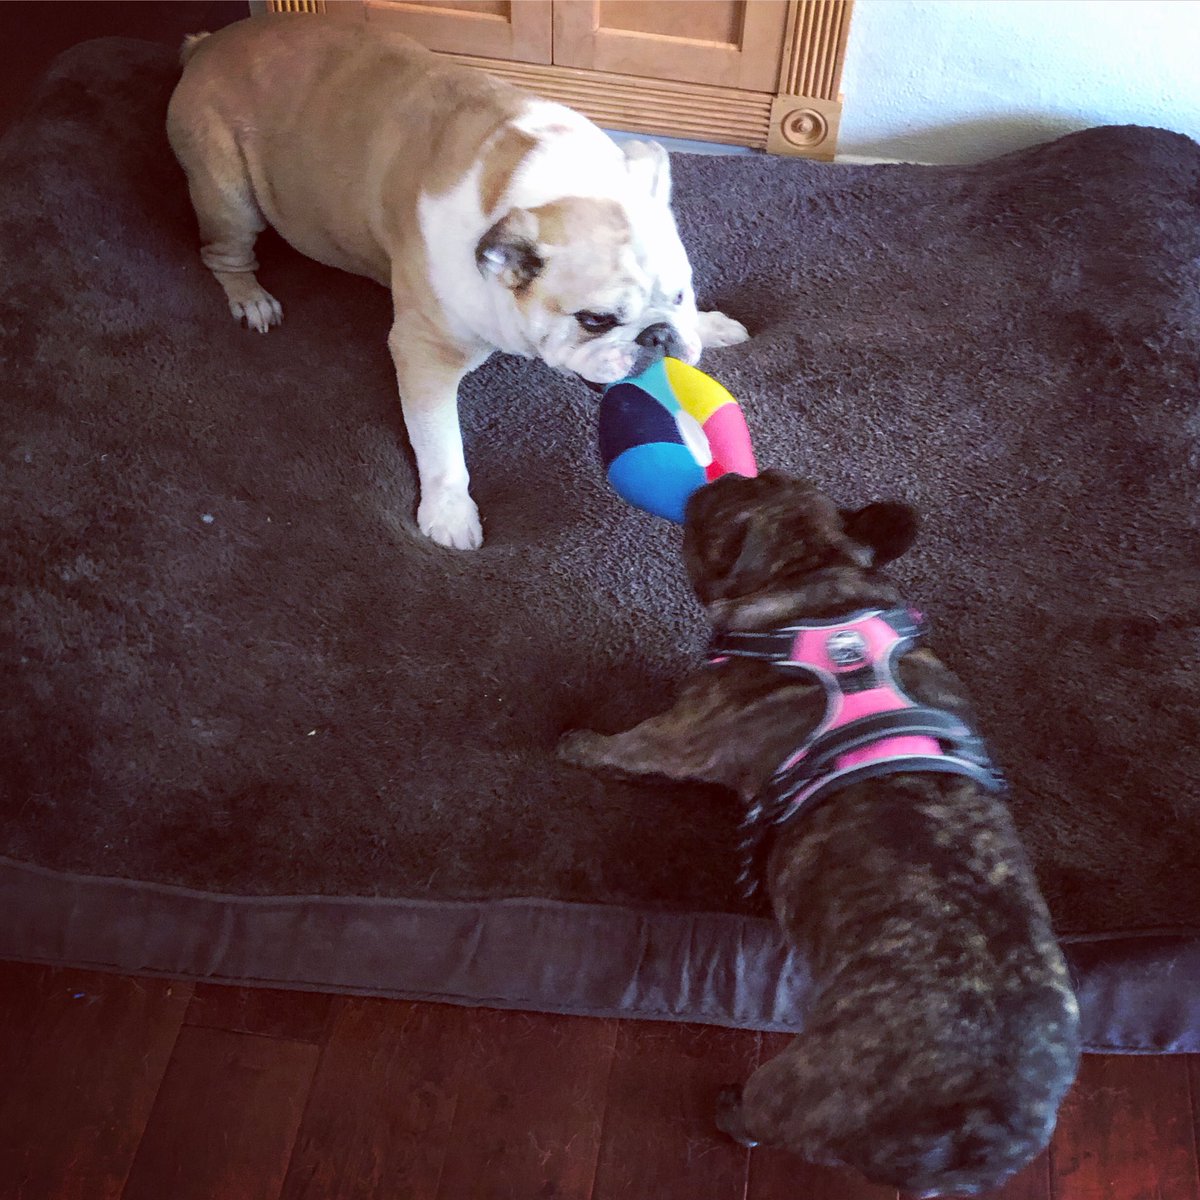 Sharing is caring, right? #tugofwar